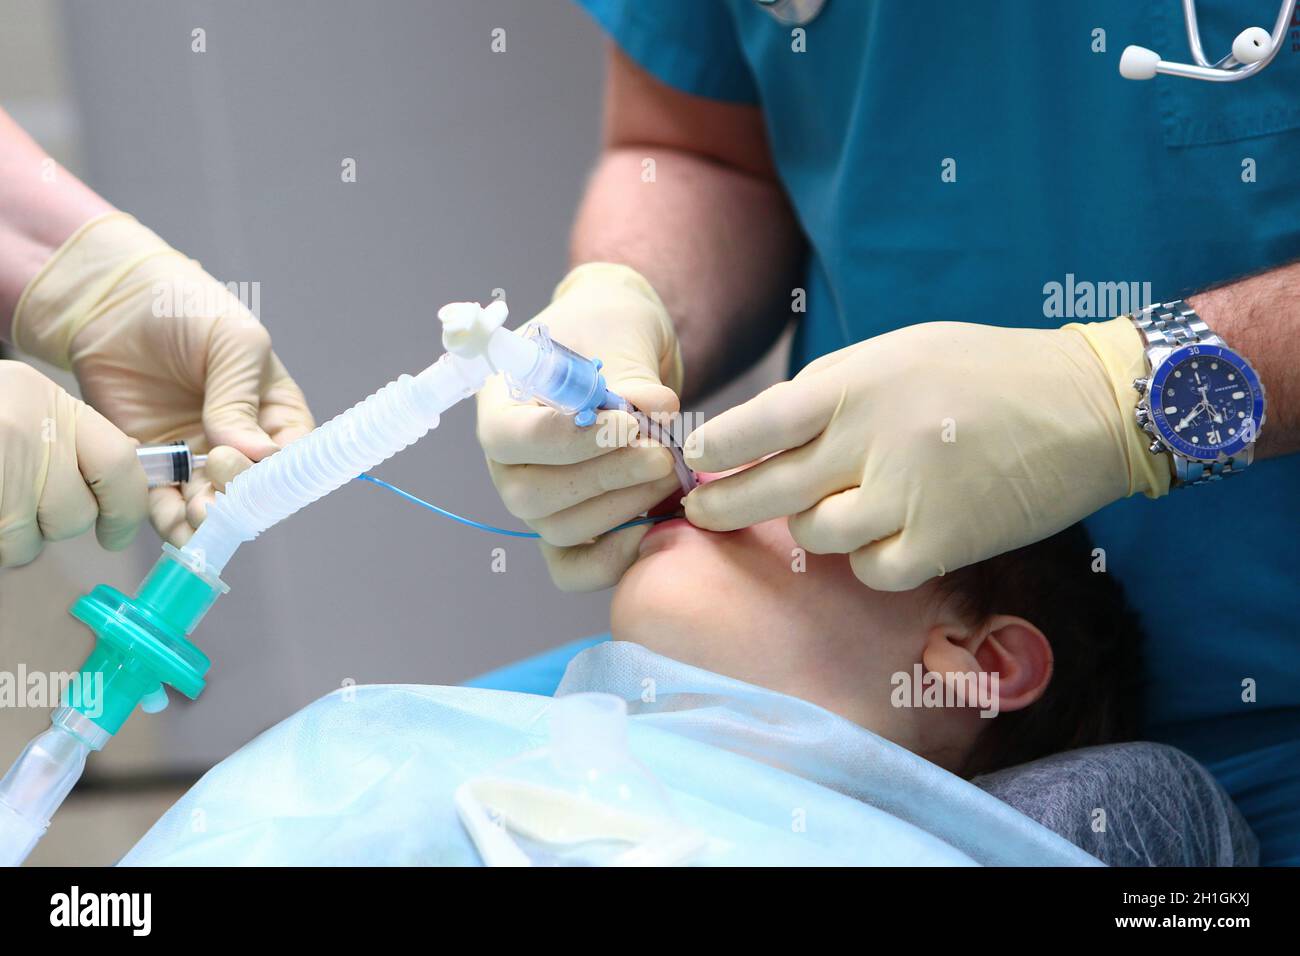 The end of the operation. The child is taken out of anesthesia. Concept of health care and life saving. Copy space. An unrecognizable photo. Stock Photo